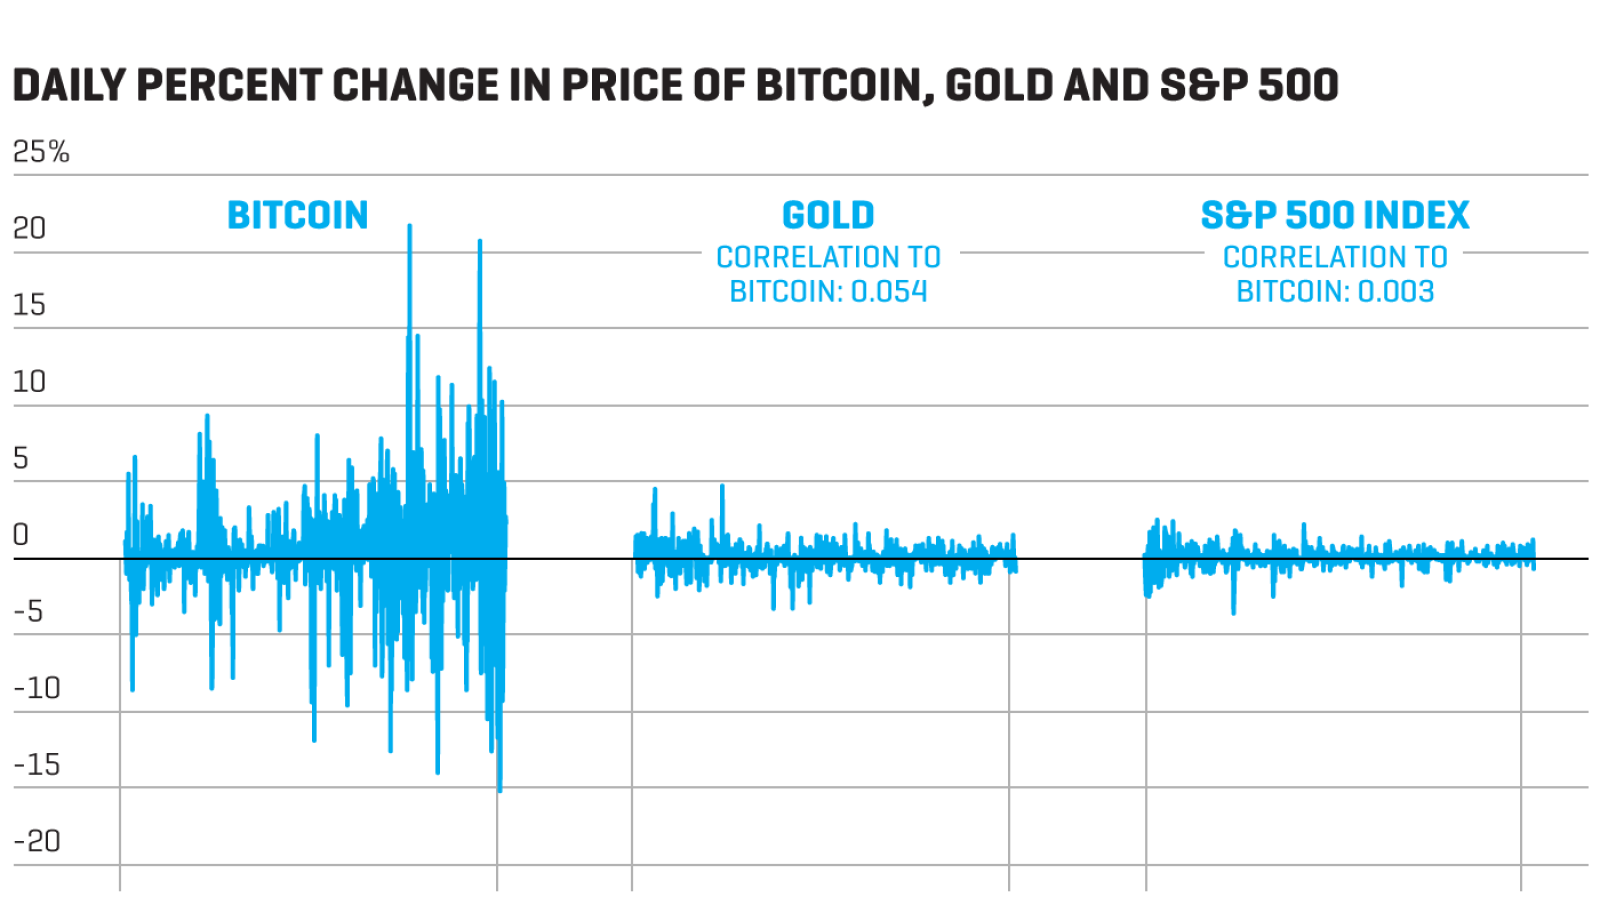 Why is Bitcoin price so volatile?